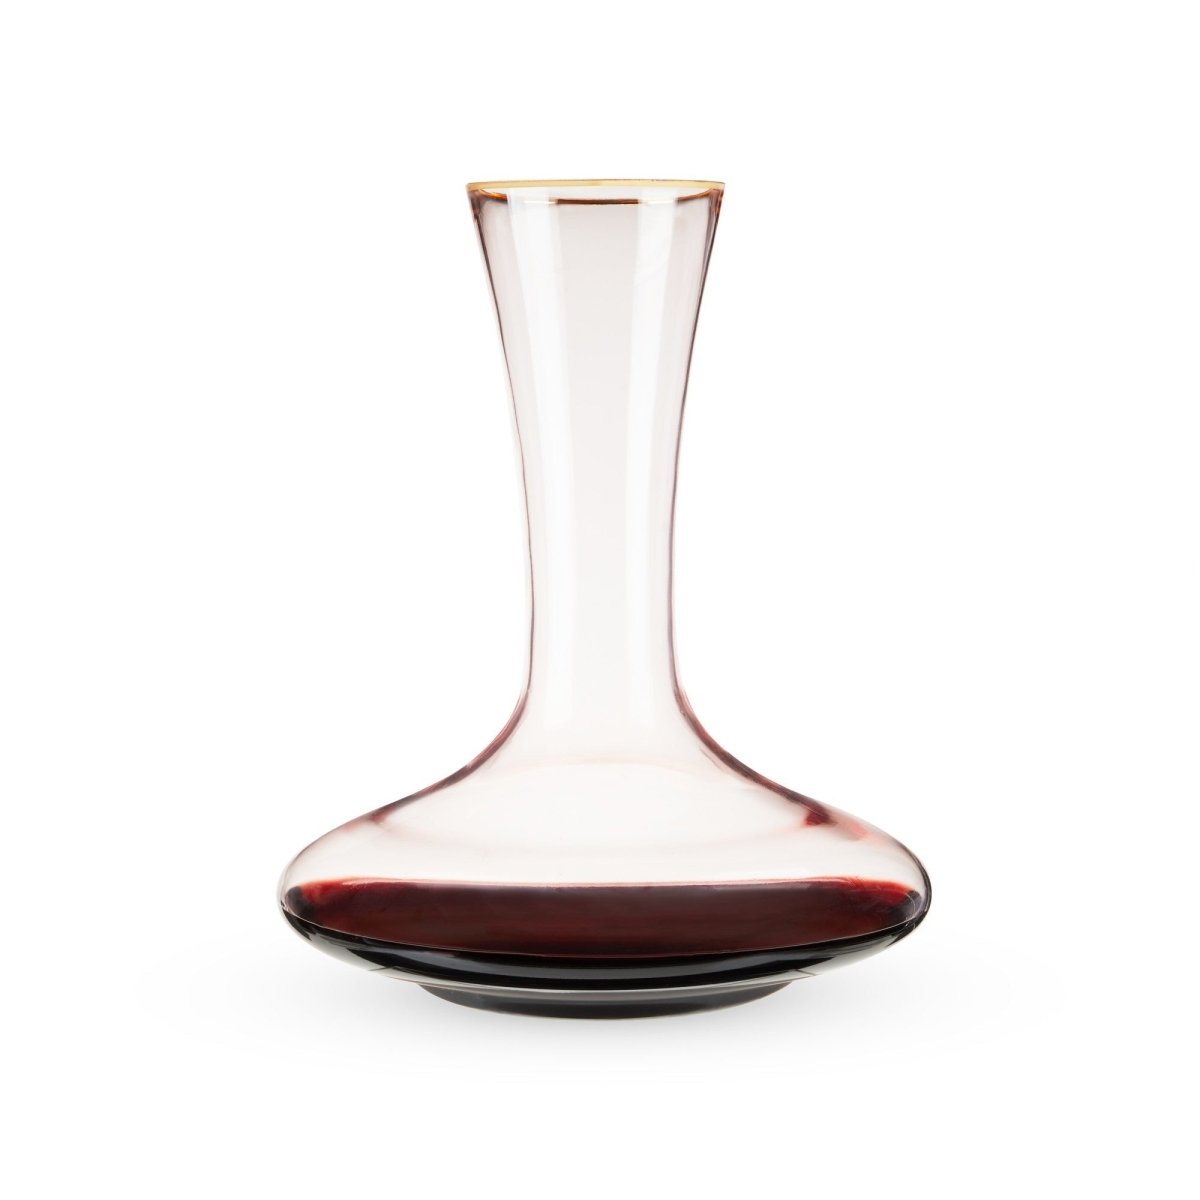 Twine Rose Crystal Decanter with Gold Rim - lily & onyx